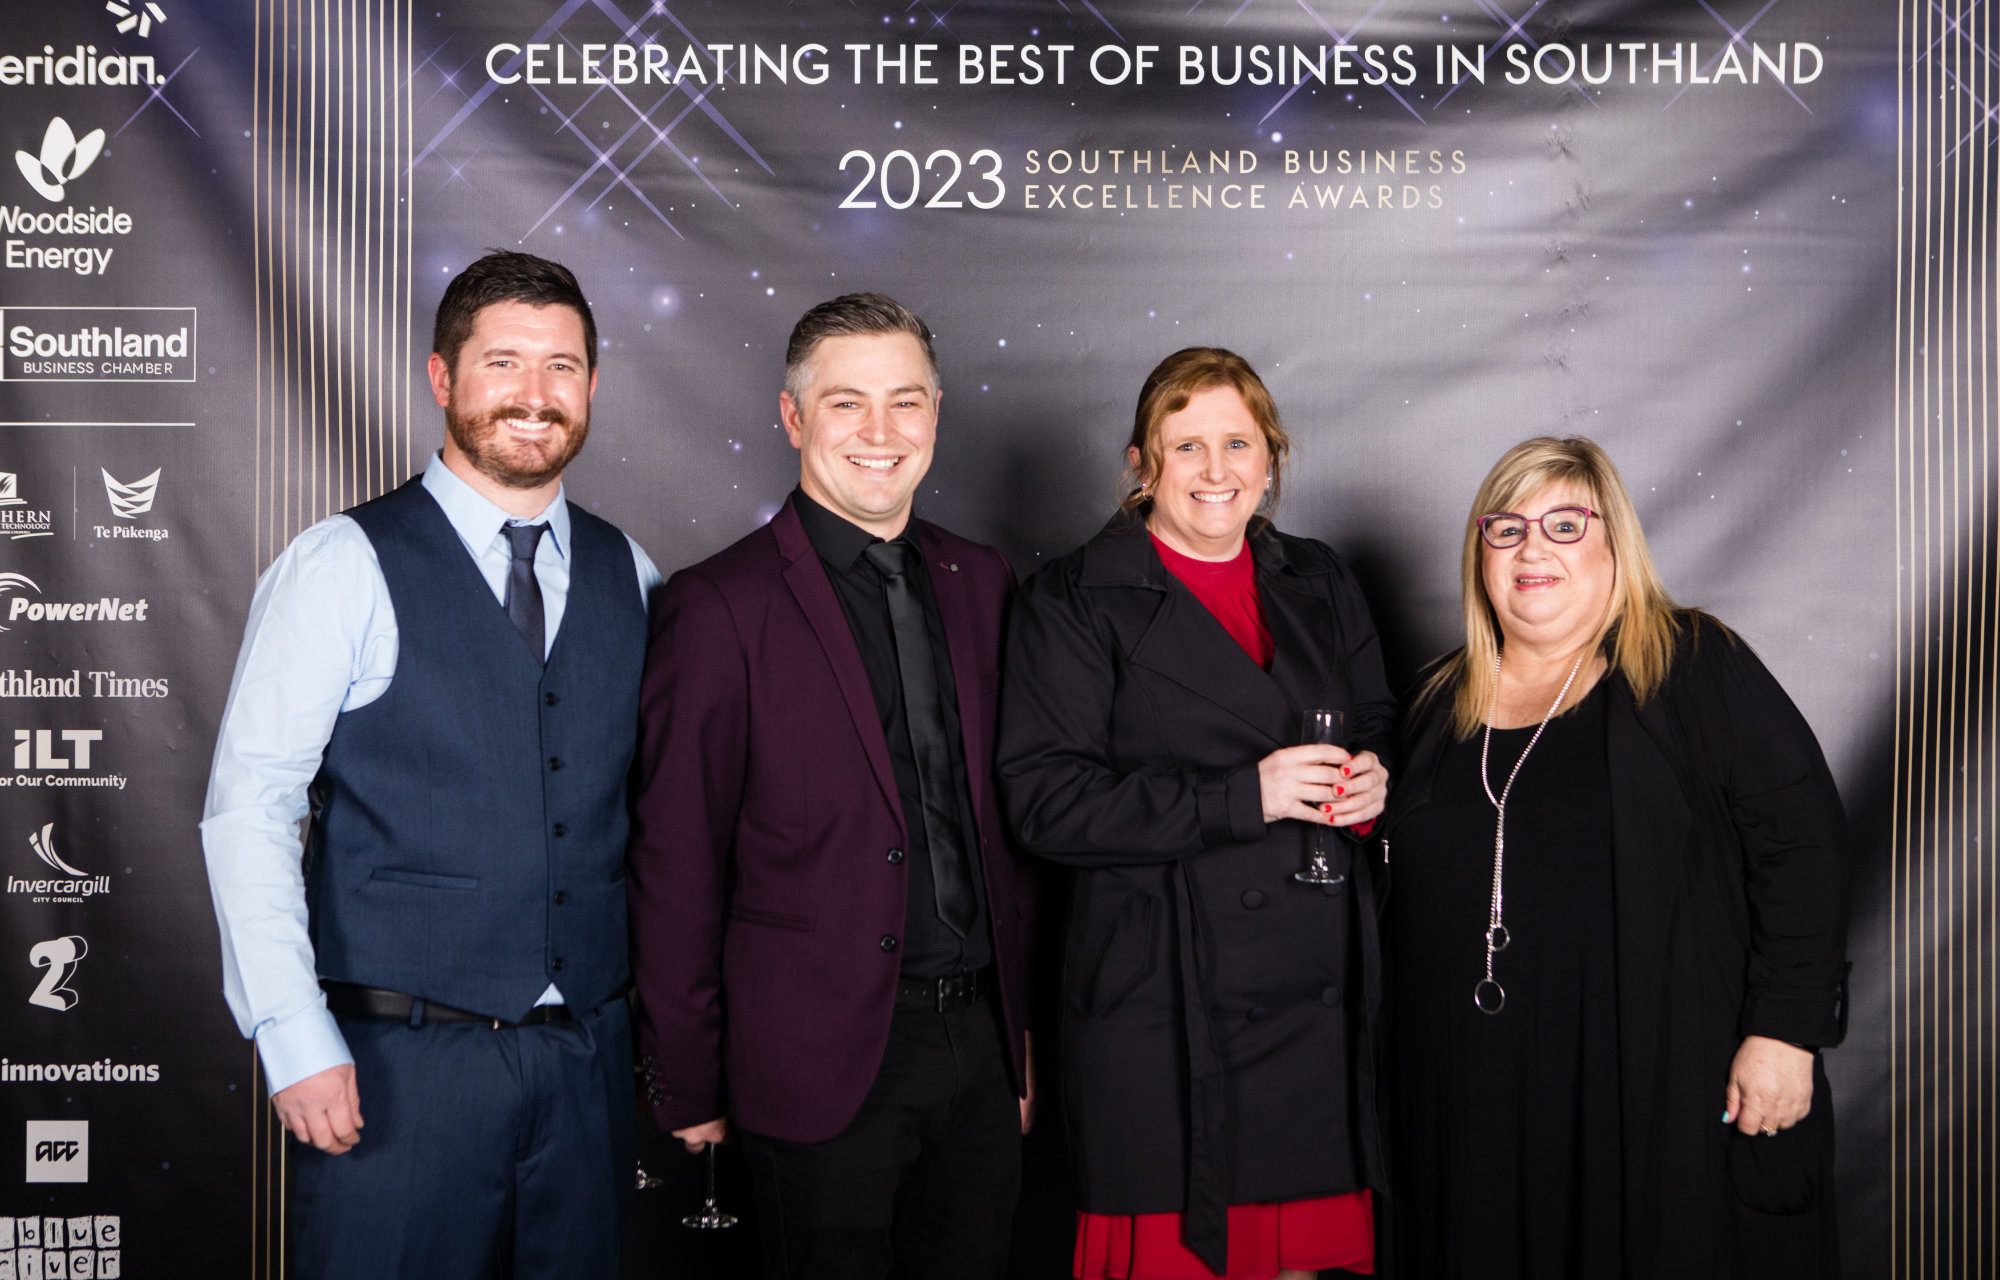 The 2023 Southern Green Hydrogen Southland Business Excellence Awards